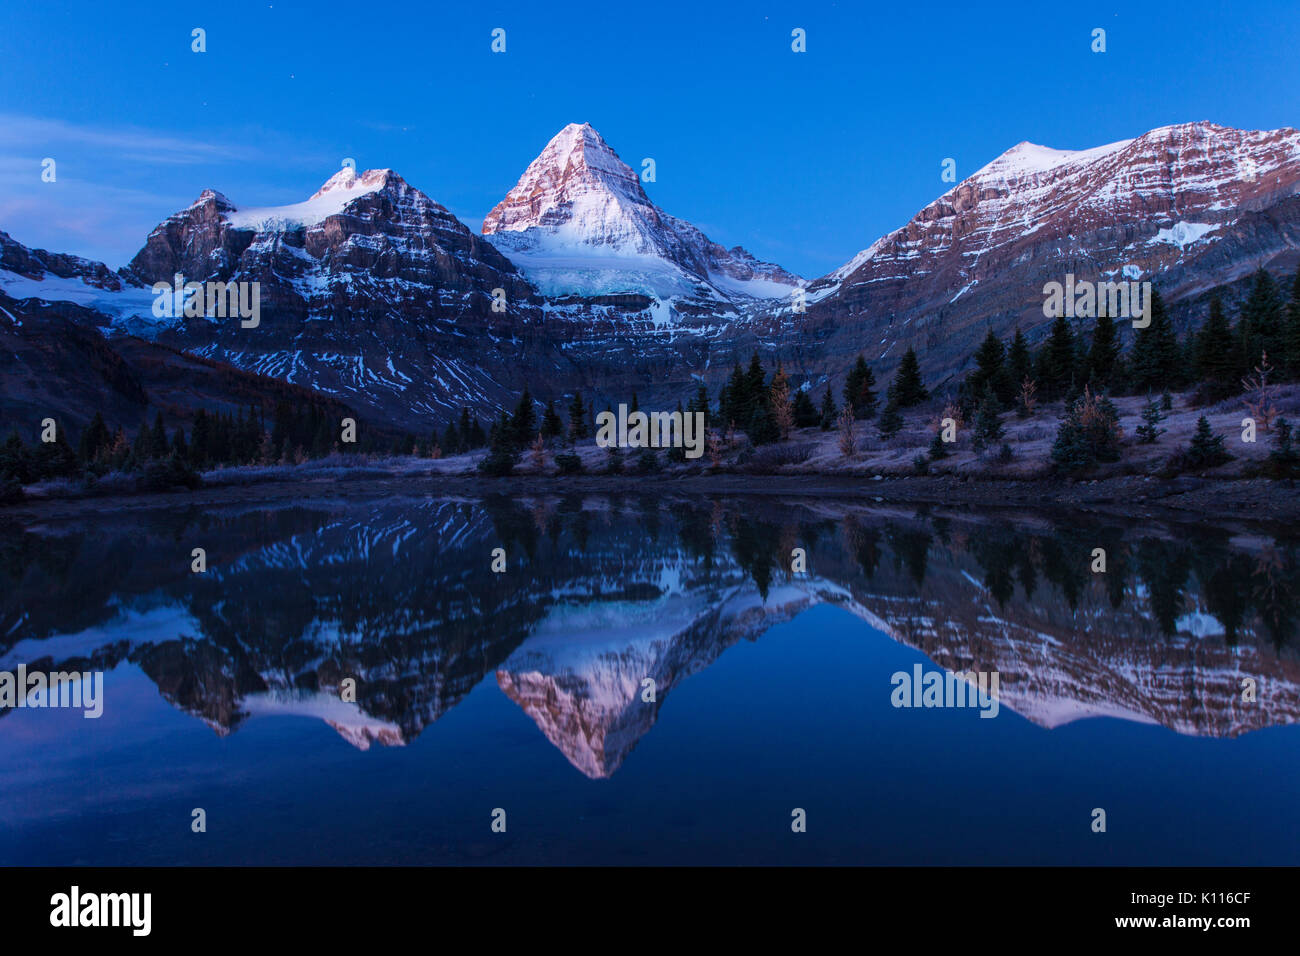 Mount Assiniboine reflected in a tarn near Lage Magog under the stars, Mount Assiniboine Provincial Park, Rocky Mountains, British Columbia, Canada. Stock Photo